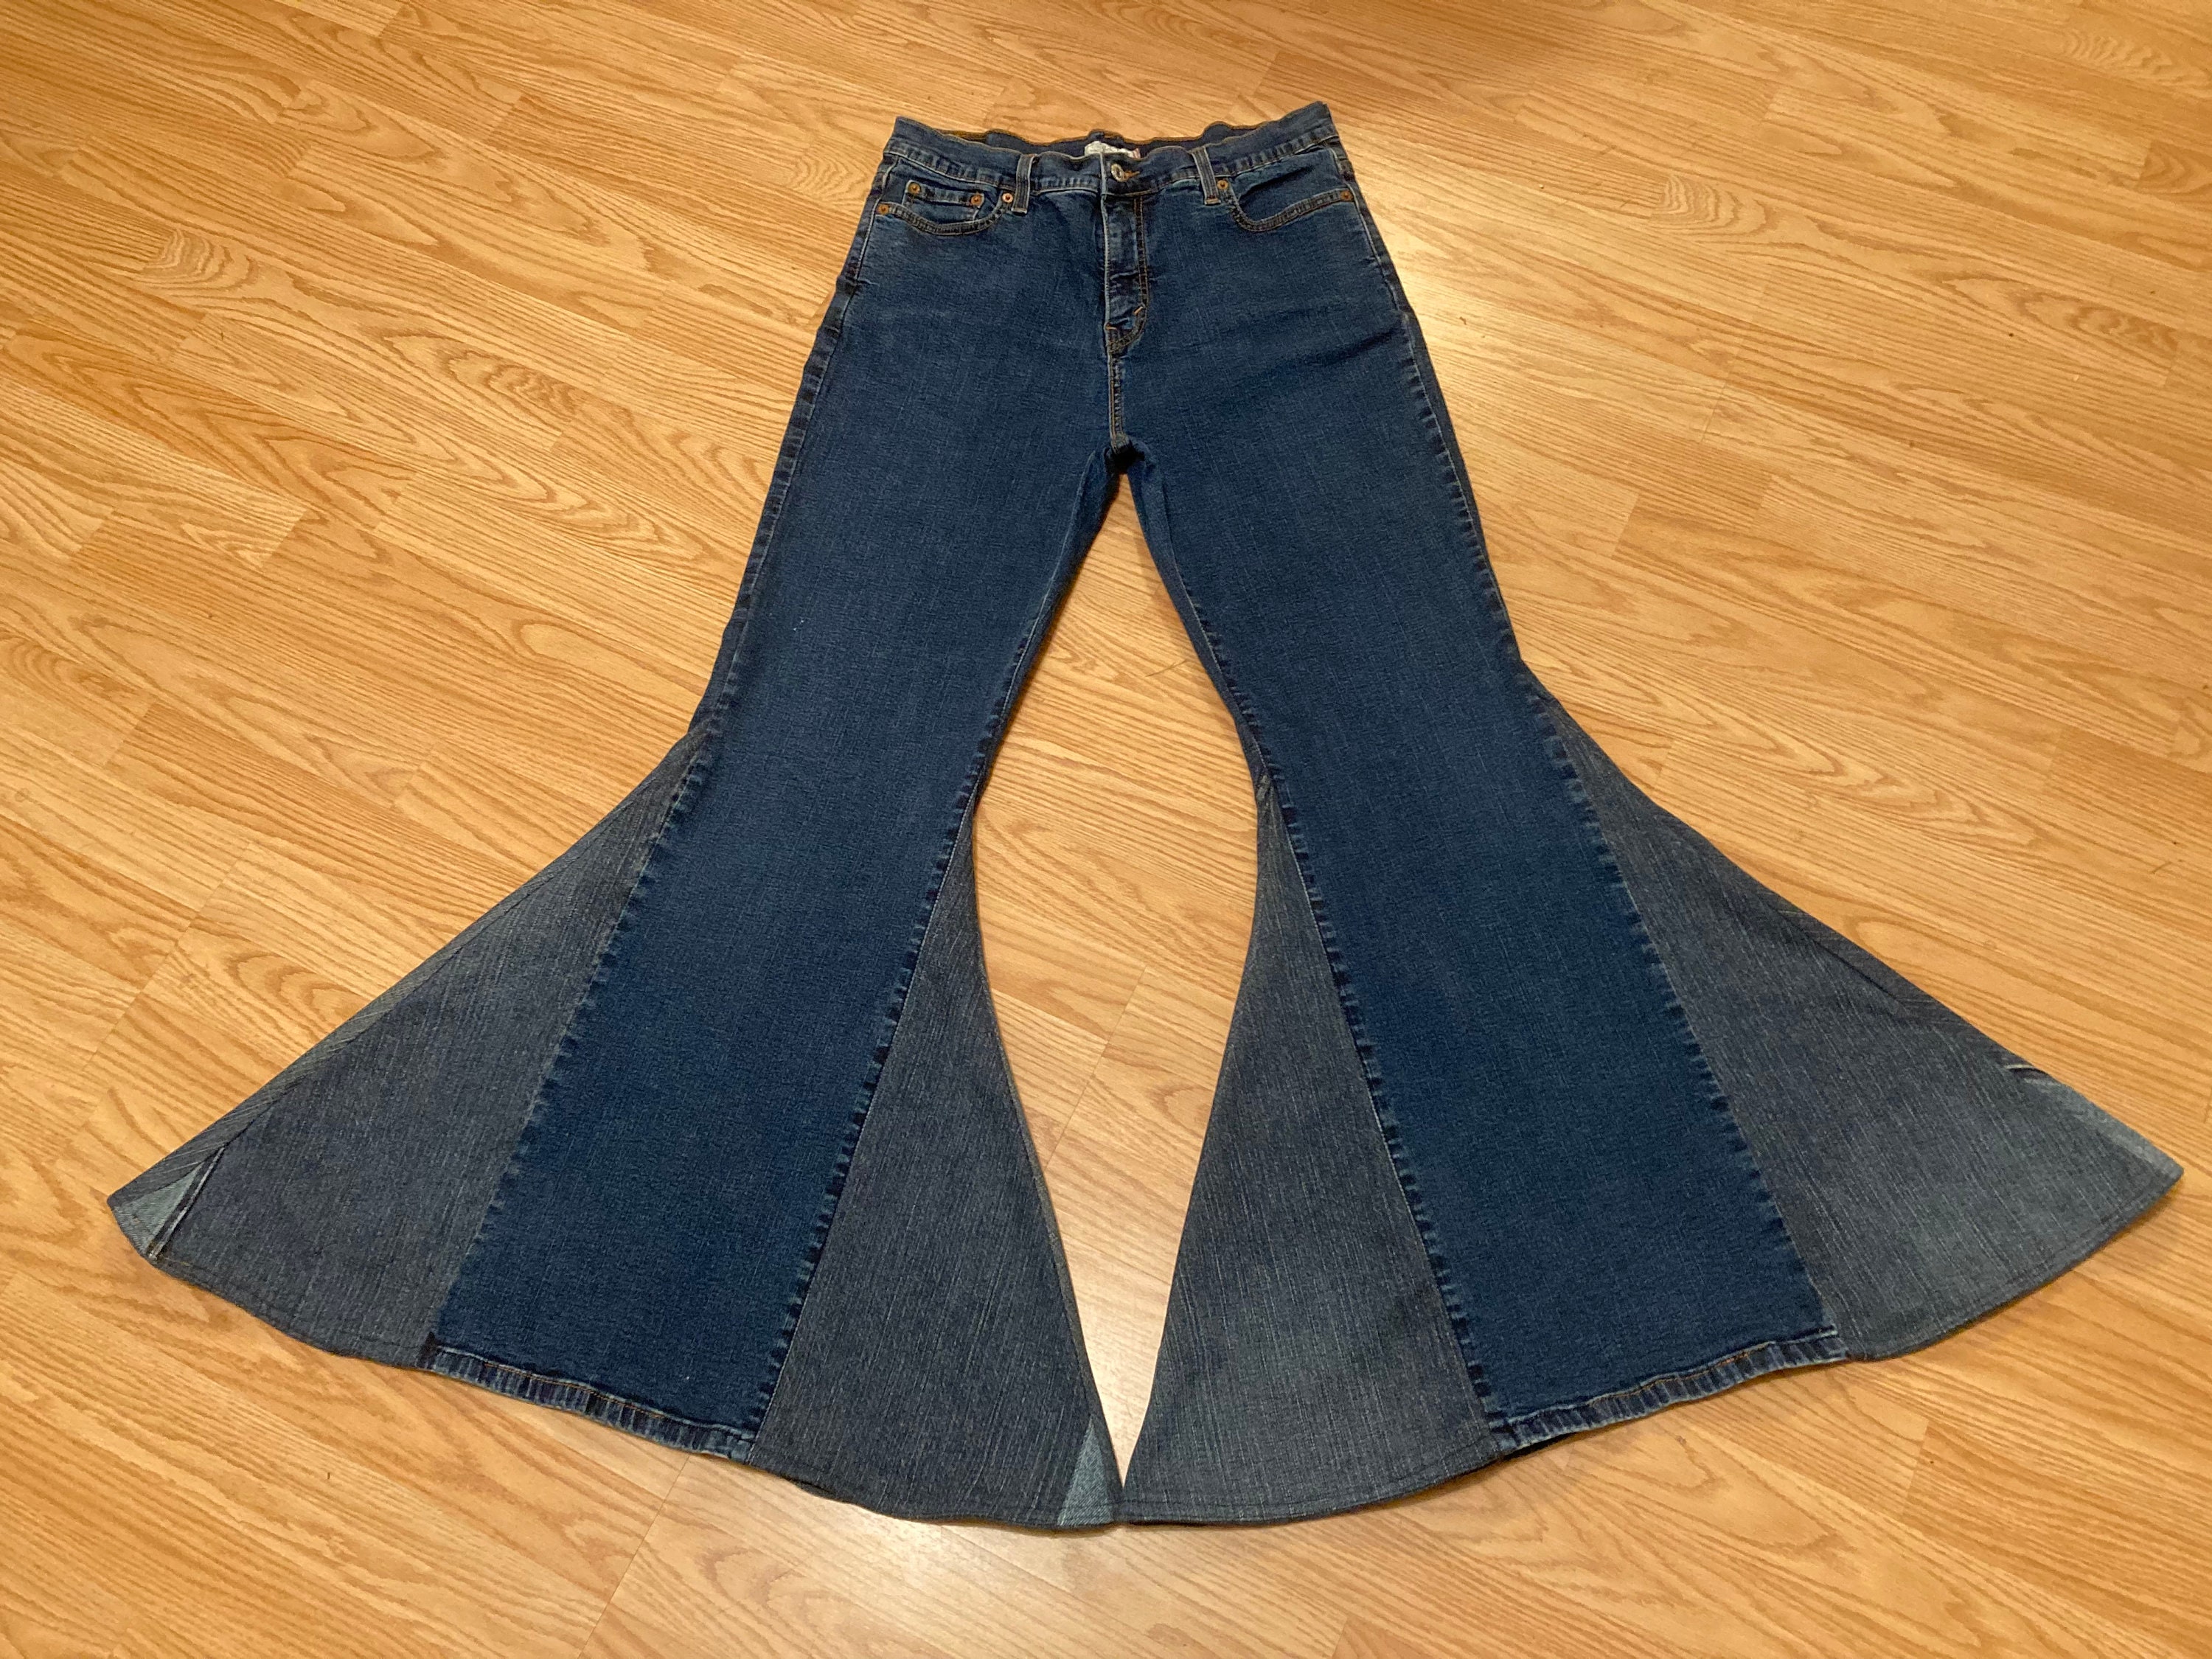 Size 14 OOAK Hippie Bell Bottom Jeans High Rise Upcycled Stretch Levi's 512  Jean Unique Huge Flare Bottoms Adult Women Ready to Ship 